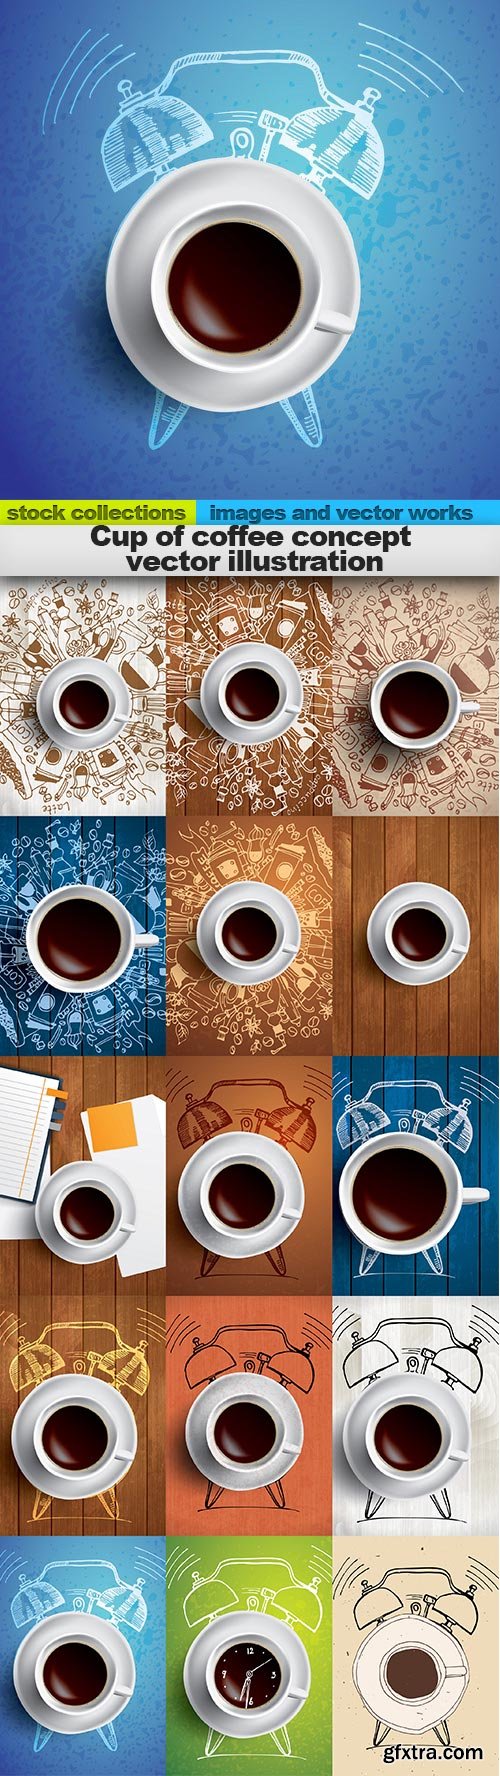 Cup of coffee concept vector illustration, 15 x EPS